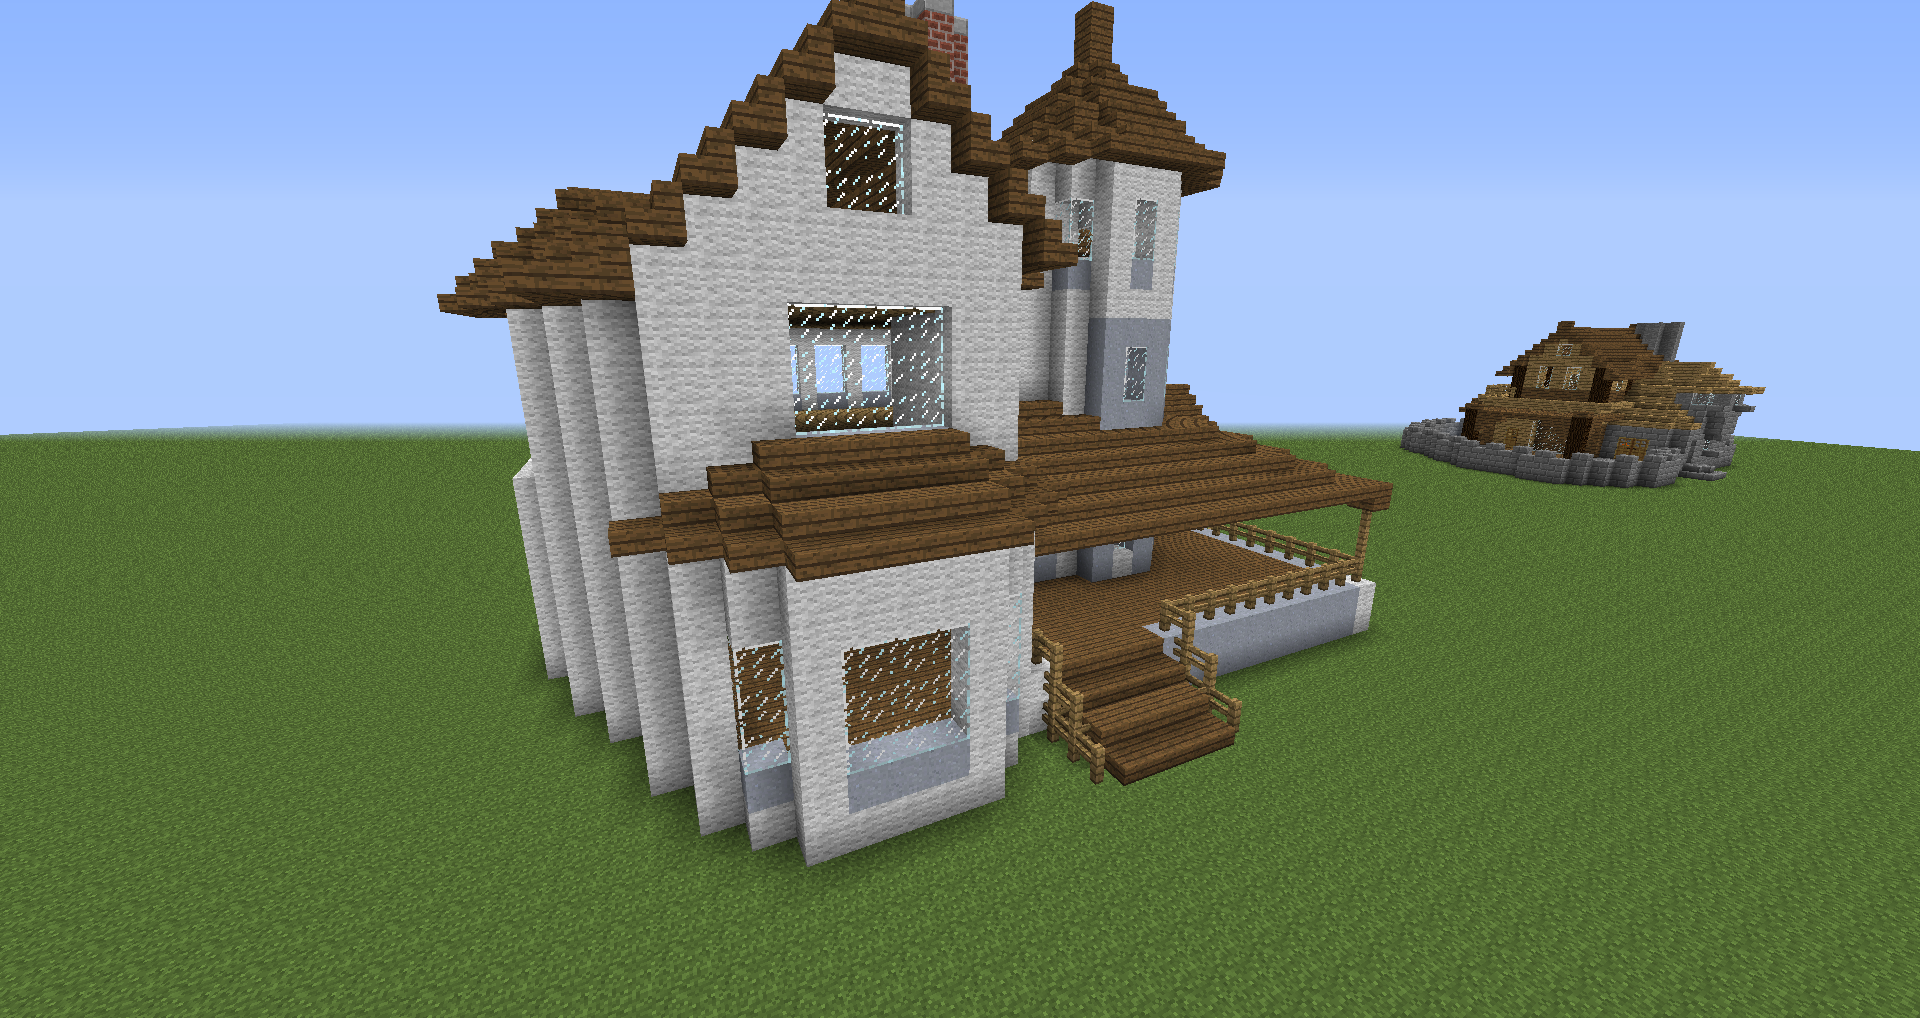 A Nice House In Minecraft